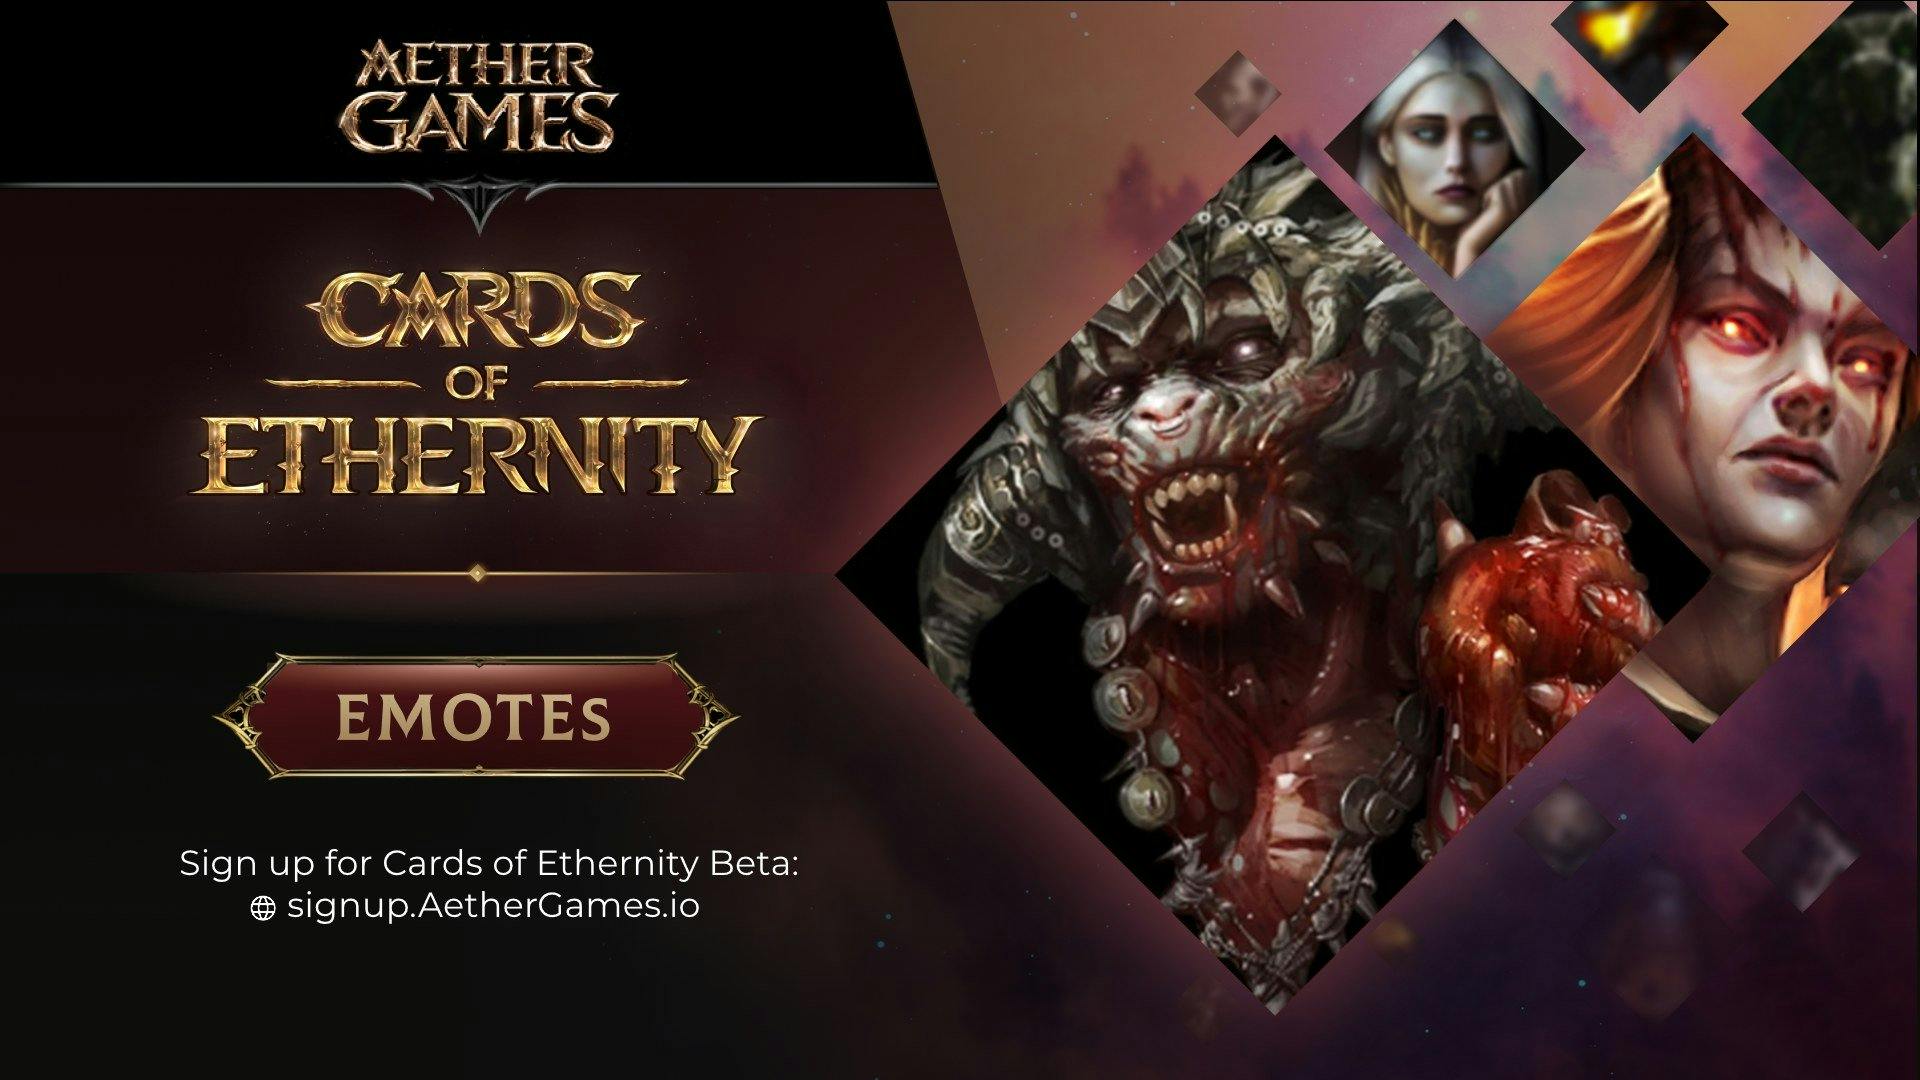 Cards of Ethernity Emotes